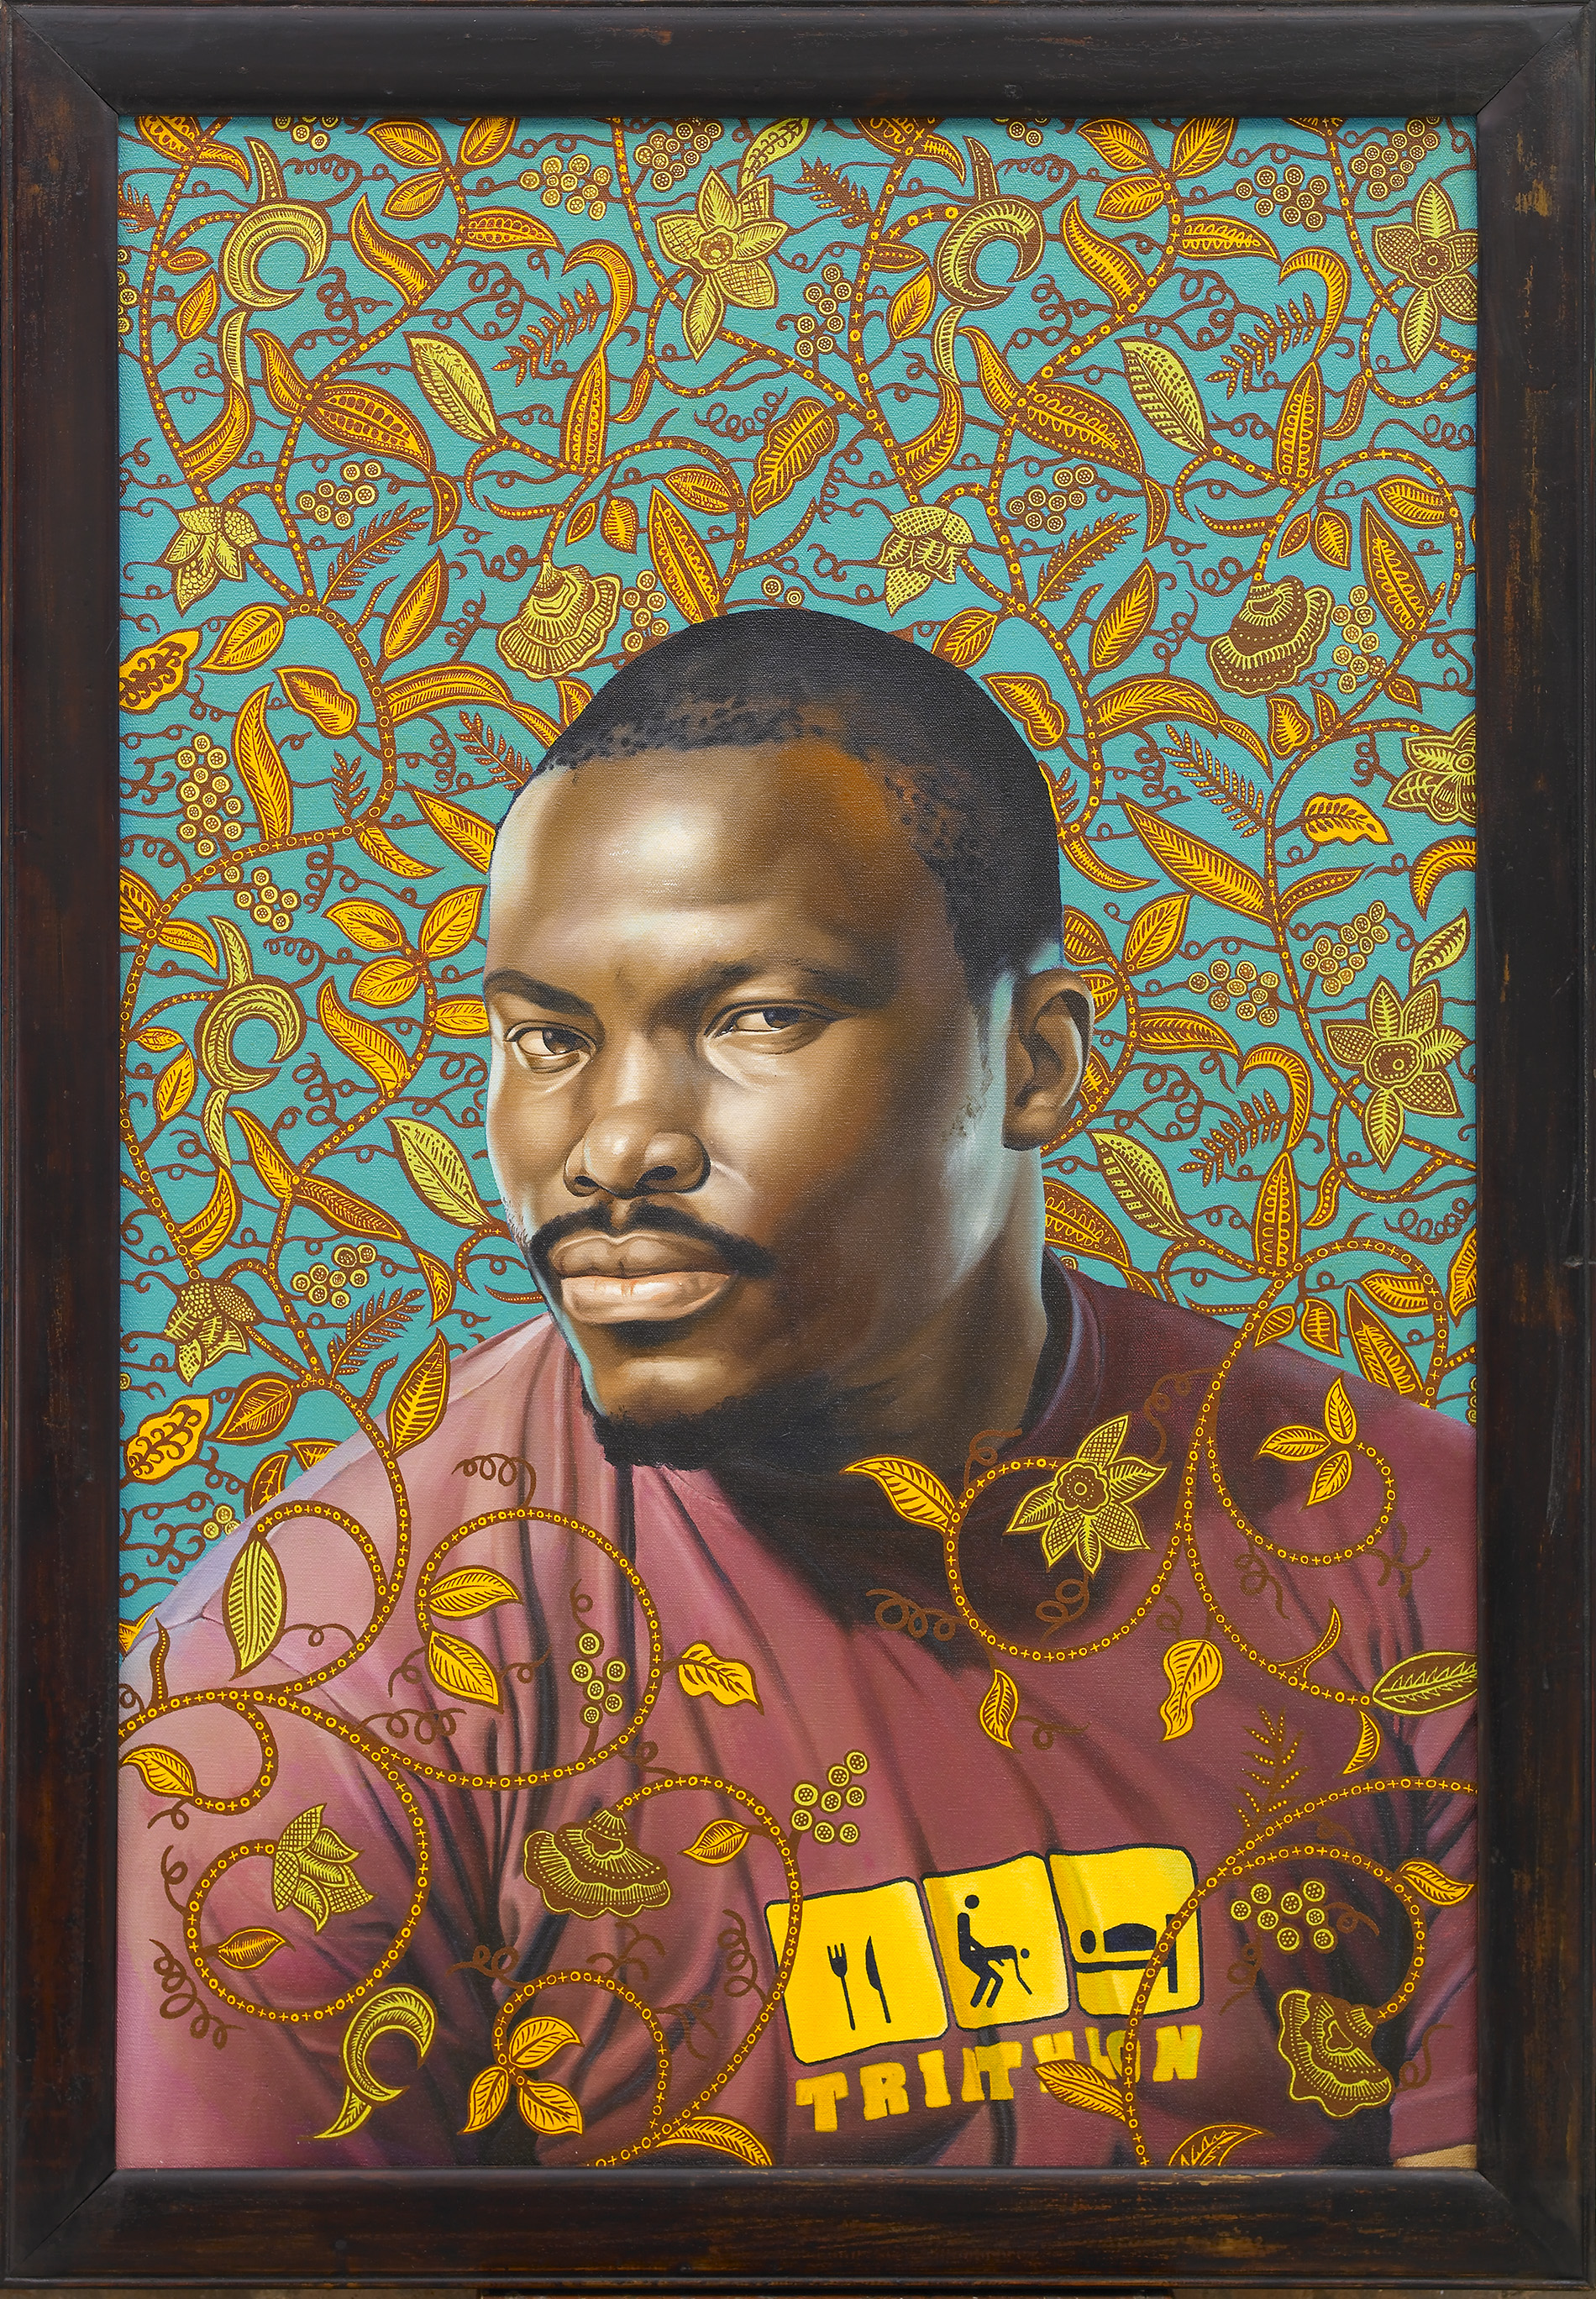 Kehinde Wiley | The World Stage: Lagos & Dakar | Soly Cisse, 2008 Oil on Canvas. | 3